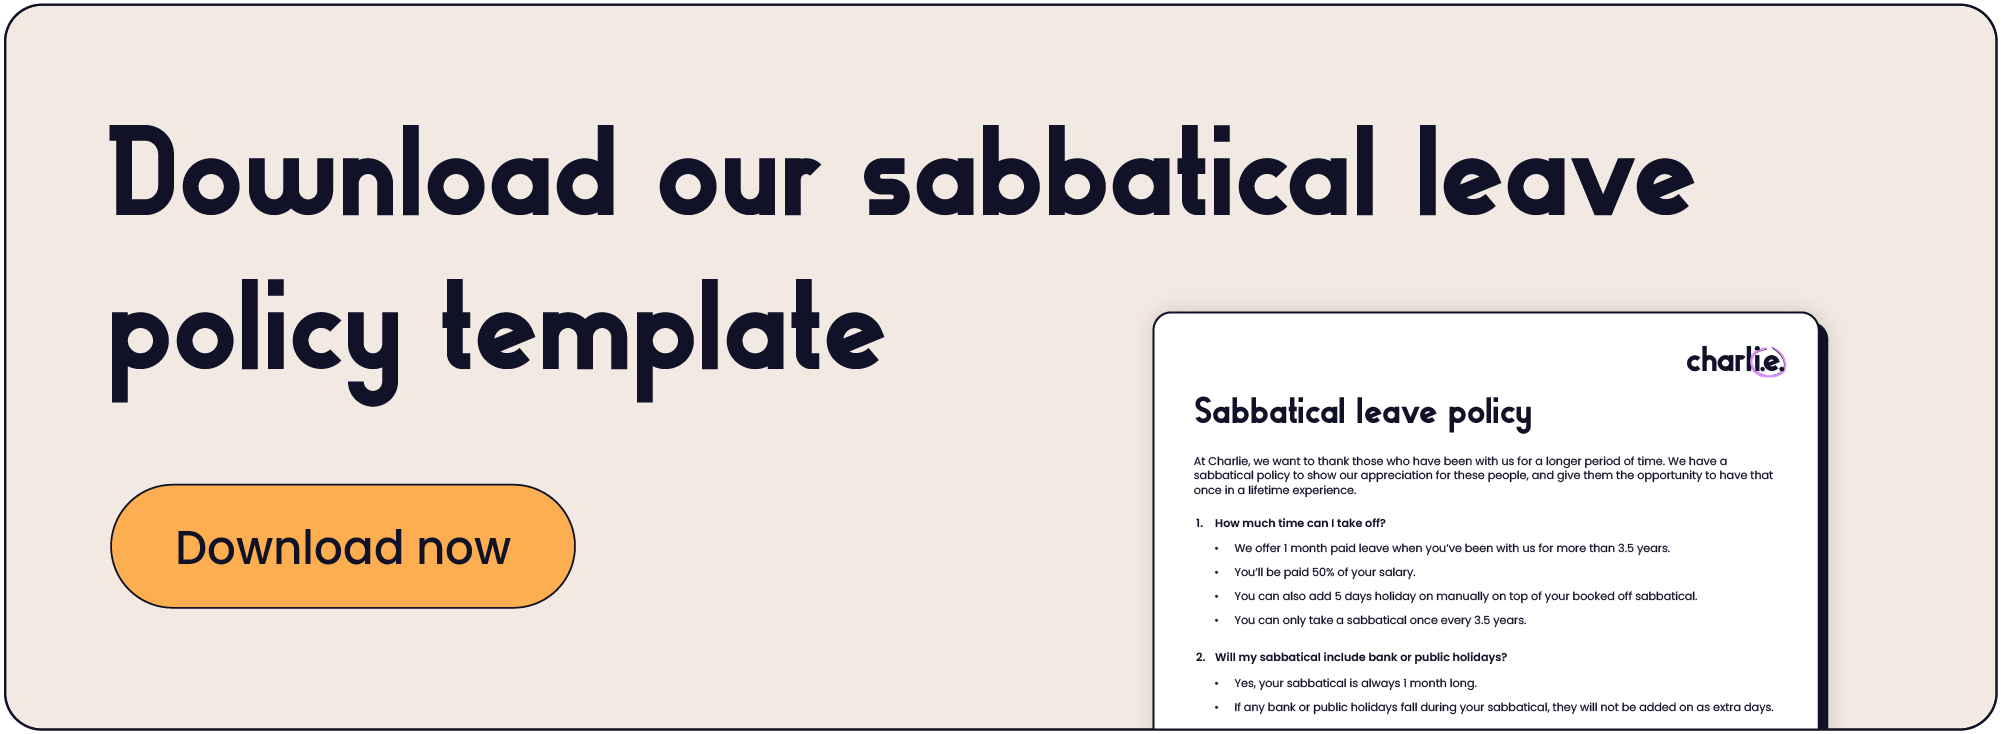 Download our sabbatical leave policy template-01.webp